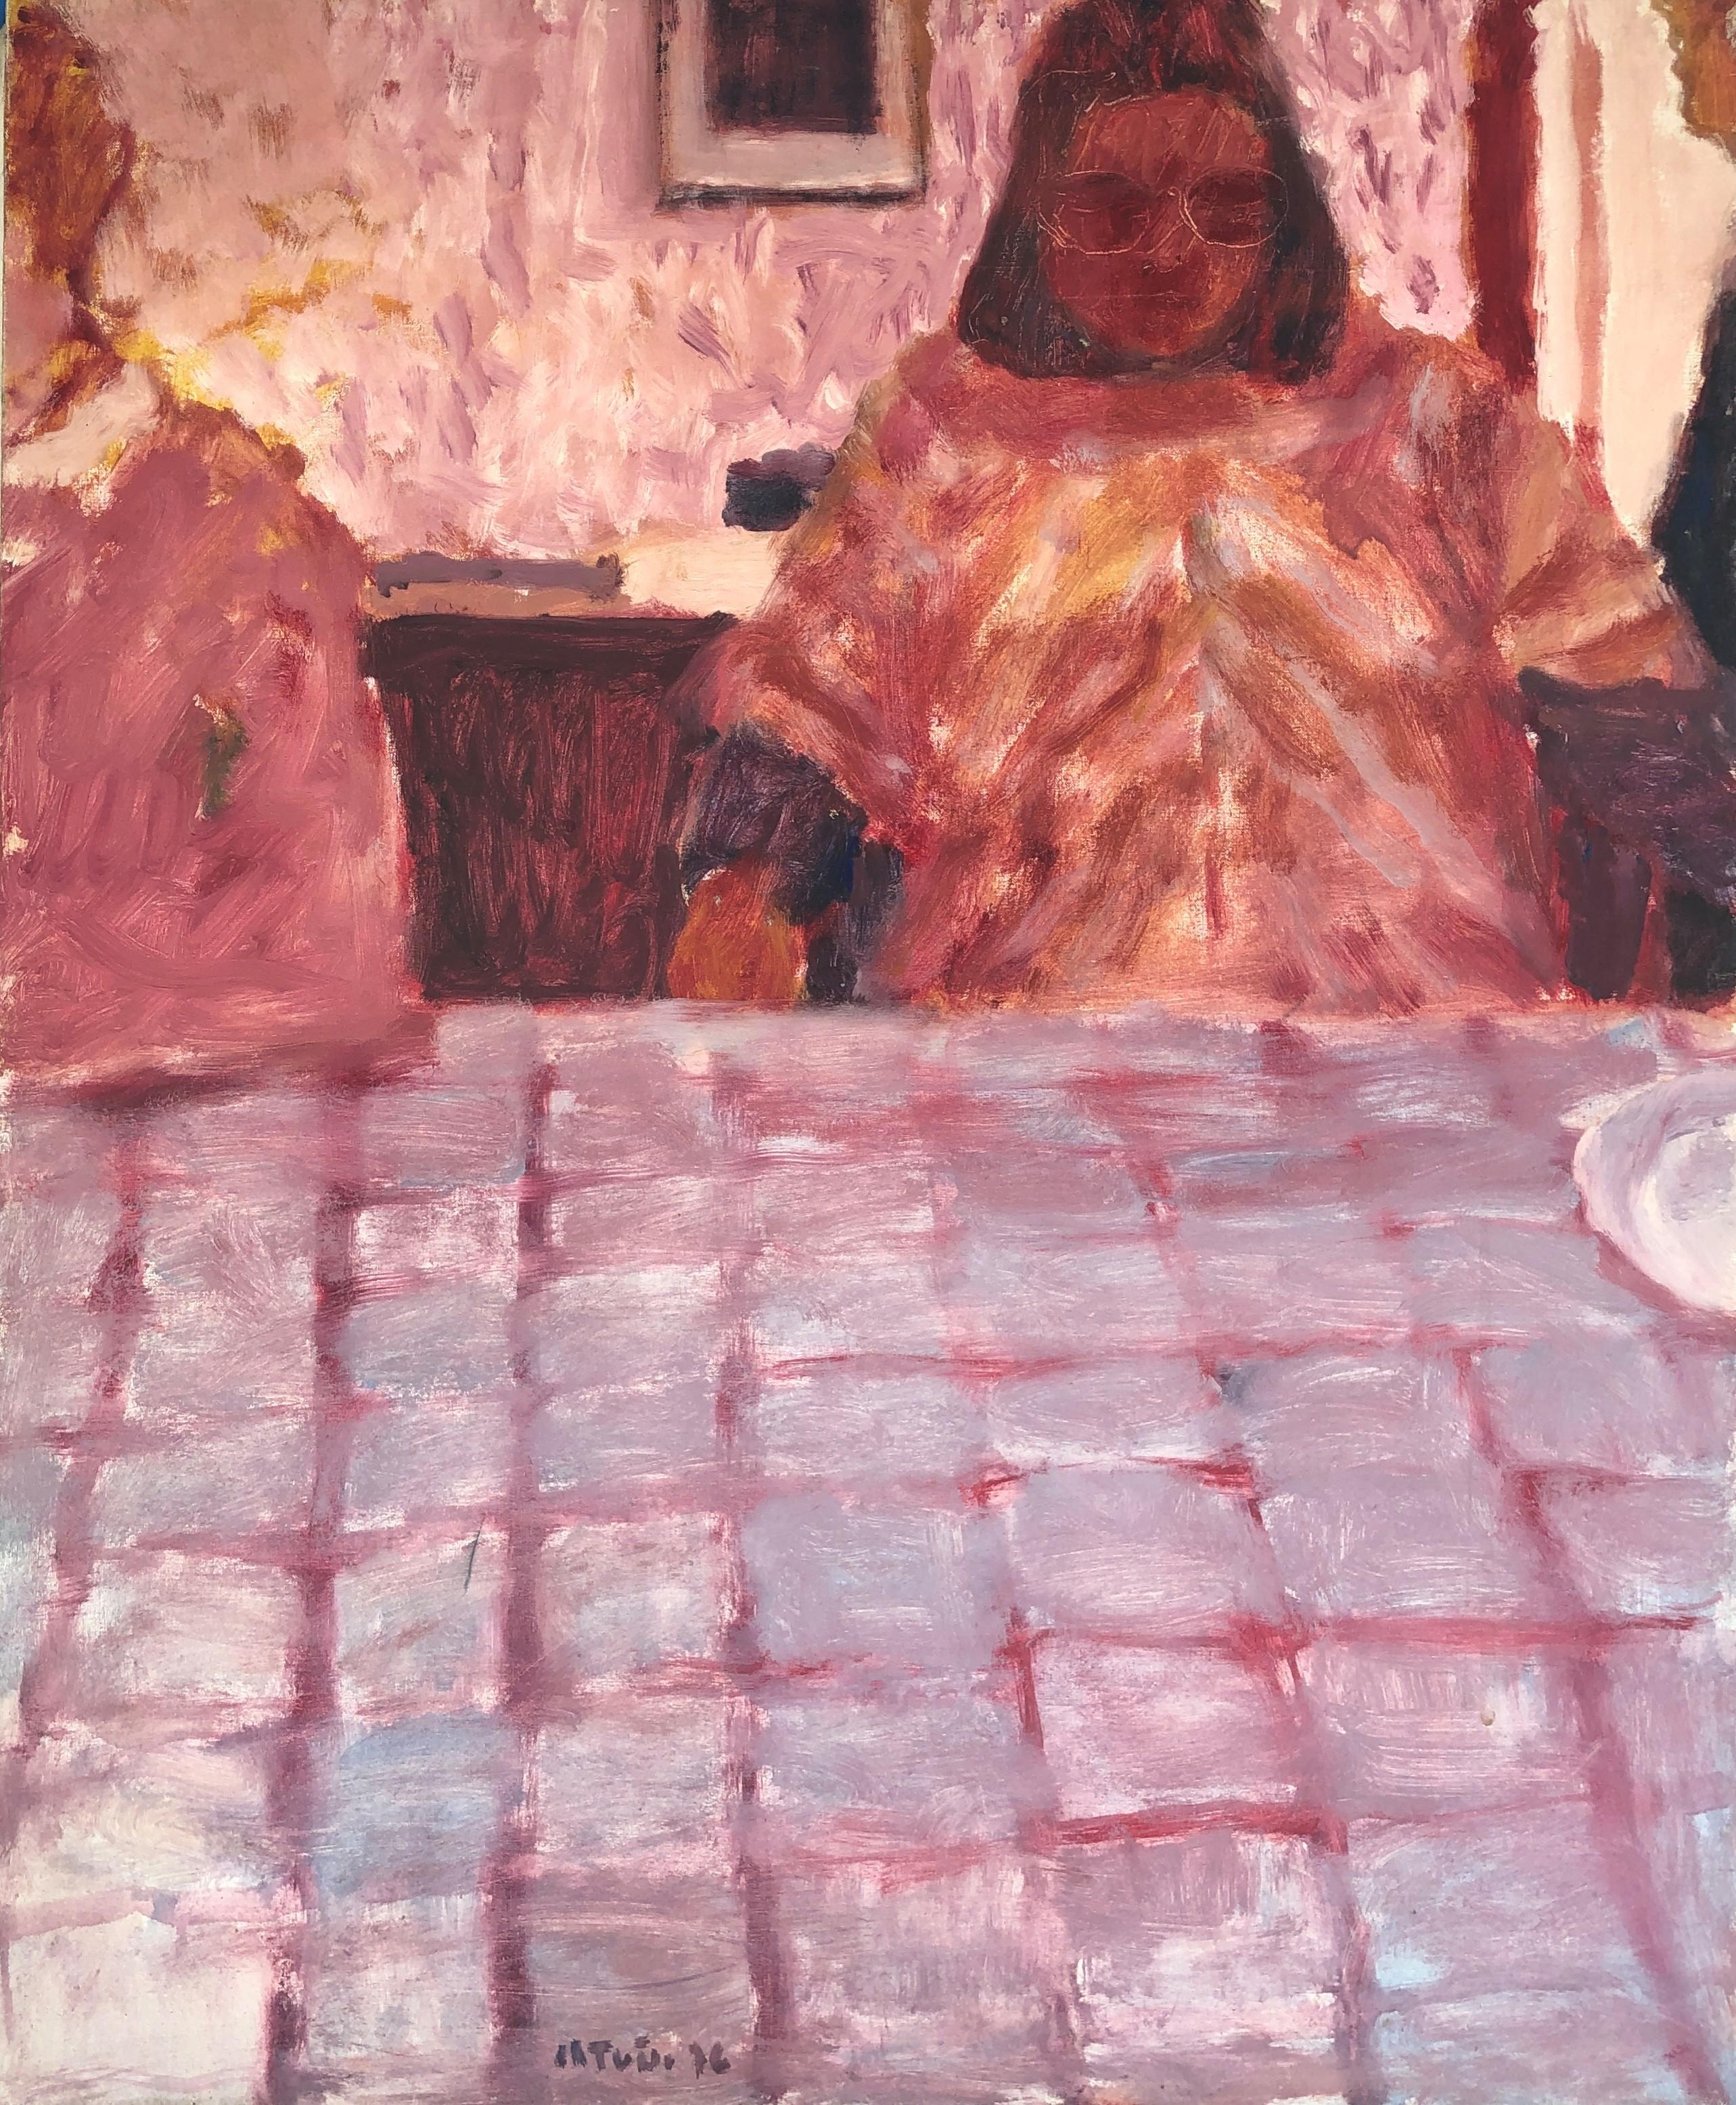 Roberto Ortuño Pascual Portrait Painting - Waiting for the food fauvist oil on canvas painting